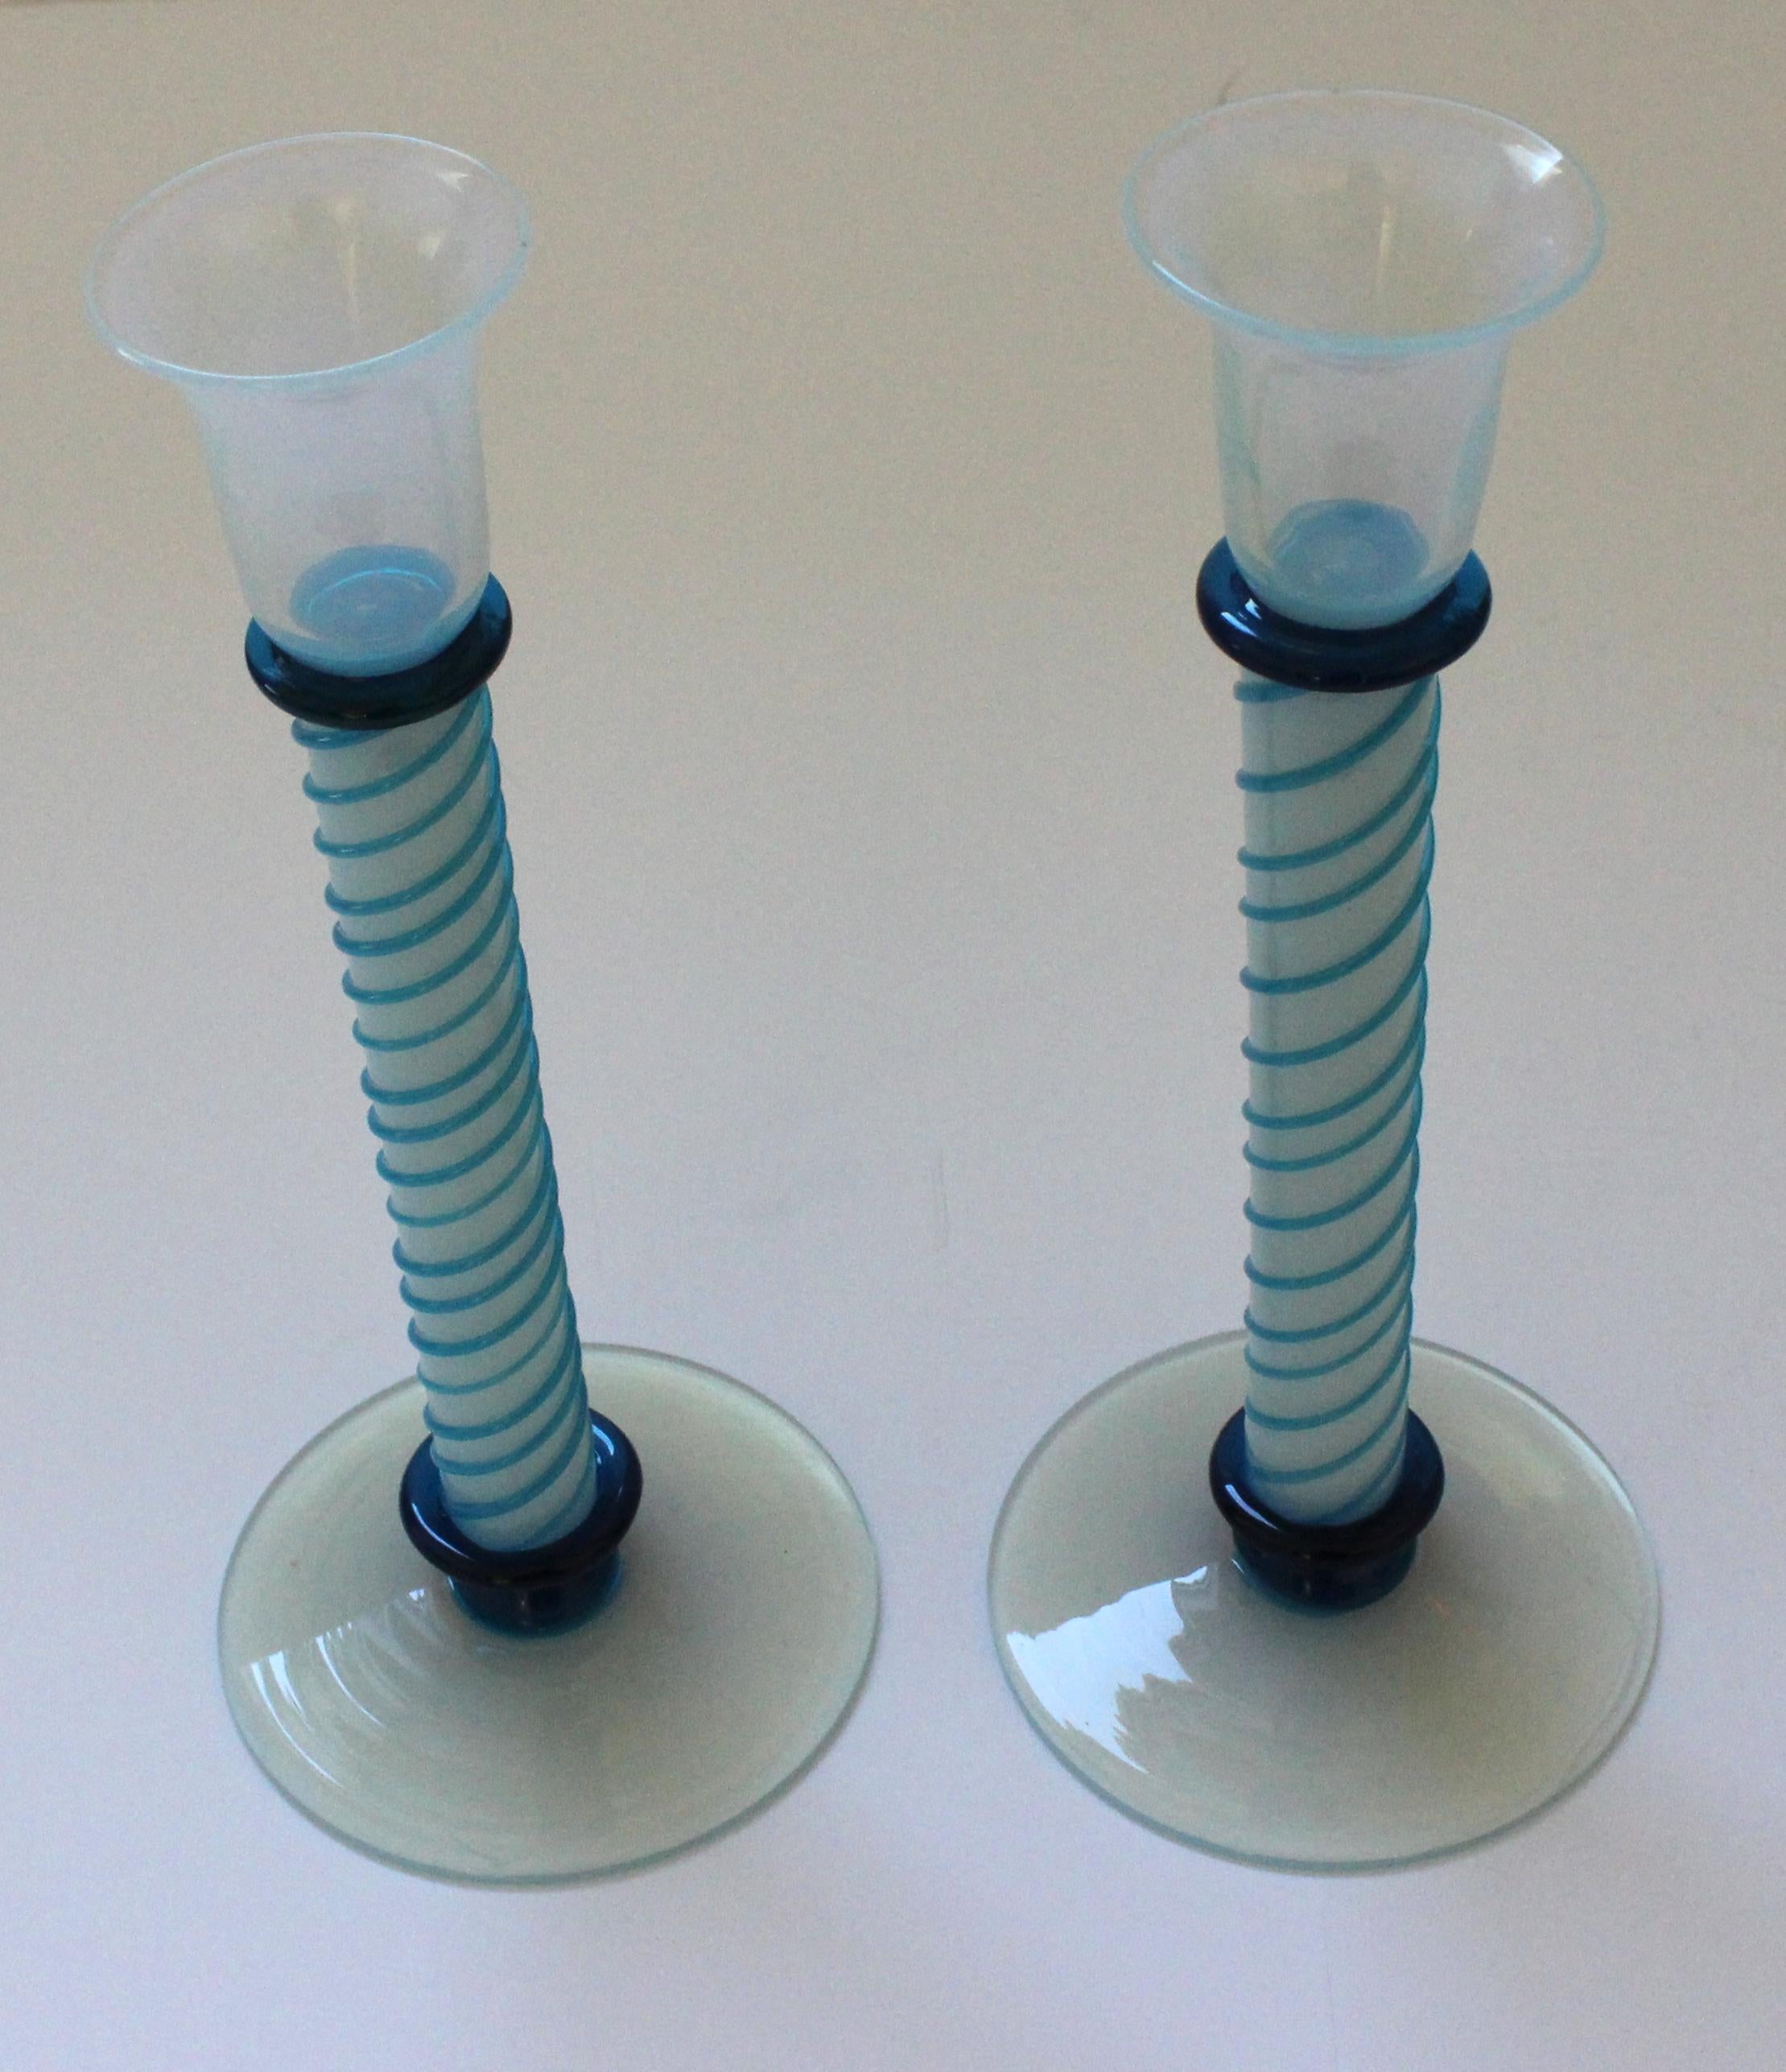 This stylish and chic pair of Murano glass candlesticks will make a subtle statement with their colors of agean blue, turquoise and opalescent.

Note: Dimensions of one candlestick are 10.50